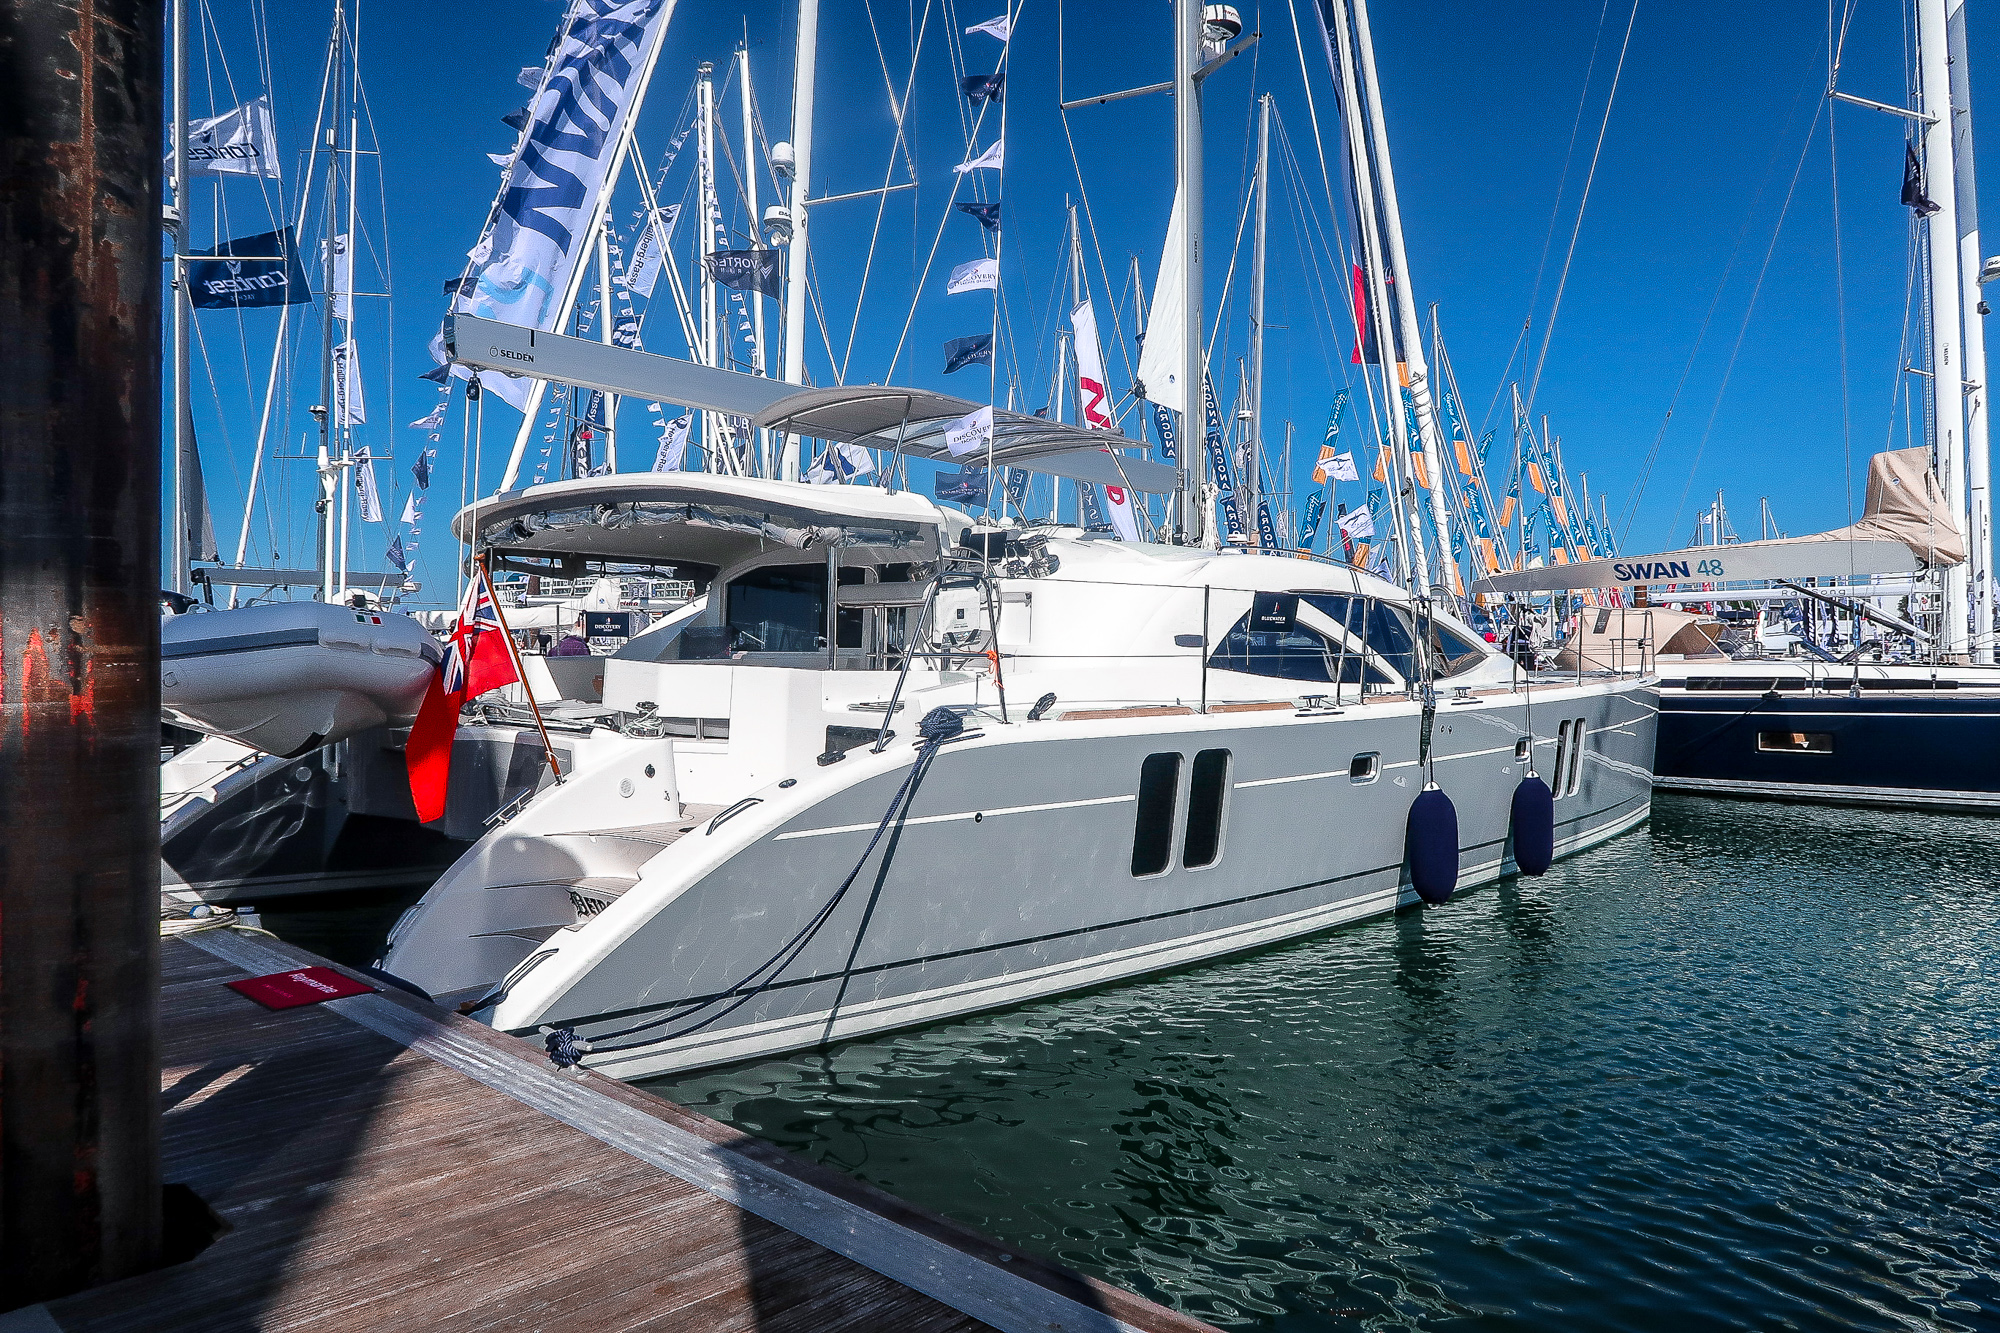 Southampton Boat Show: How To Get Discounted Tickets 51